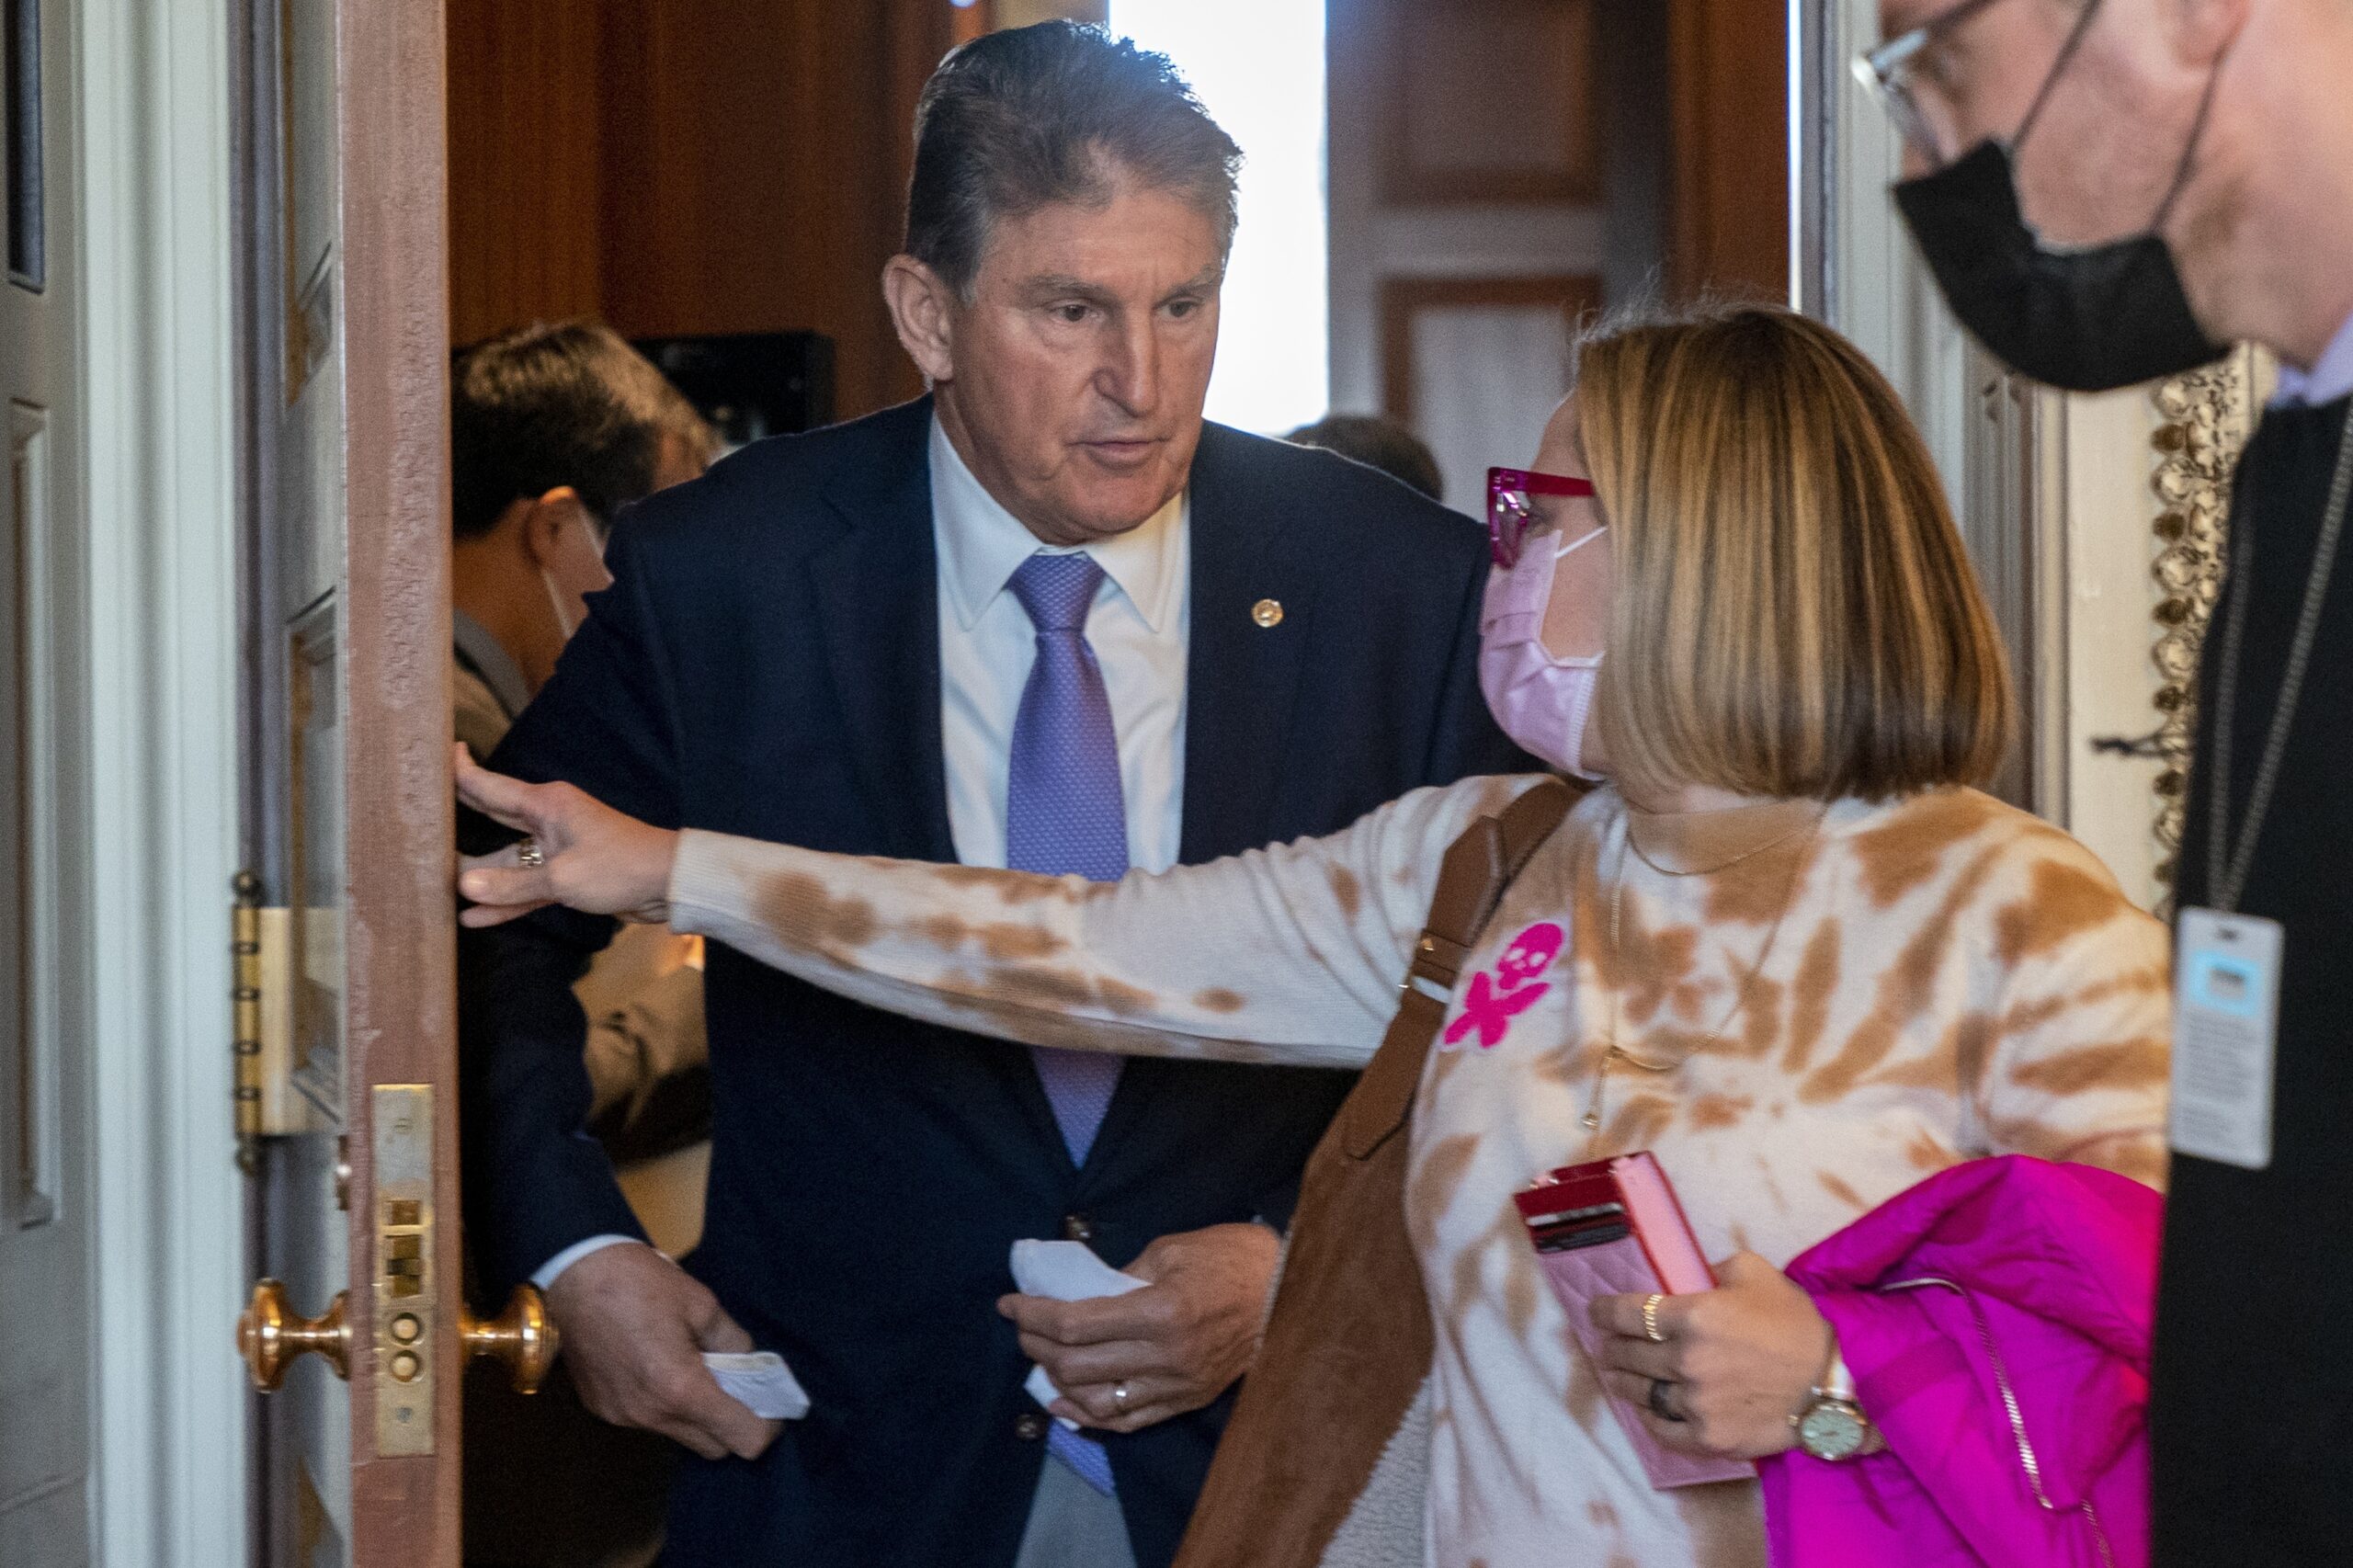 Sen. Kyrsten Sinema, D-Ariz., right, holds the door open for Sen. Joe Manchin, D-W.Va., left, after they attended a Democratic policy luncheon, Tuesday, Nov. 16, 2021, on Capitol Hill in Washington. (AP Photo/Jacquelyn Martin)